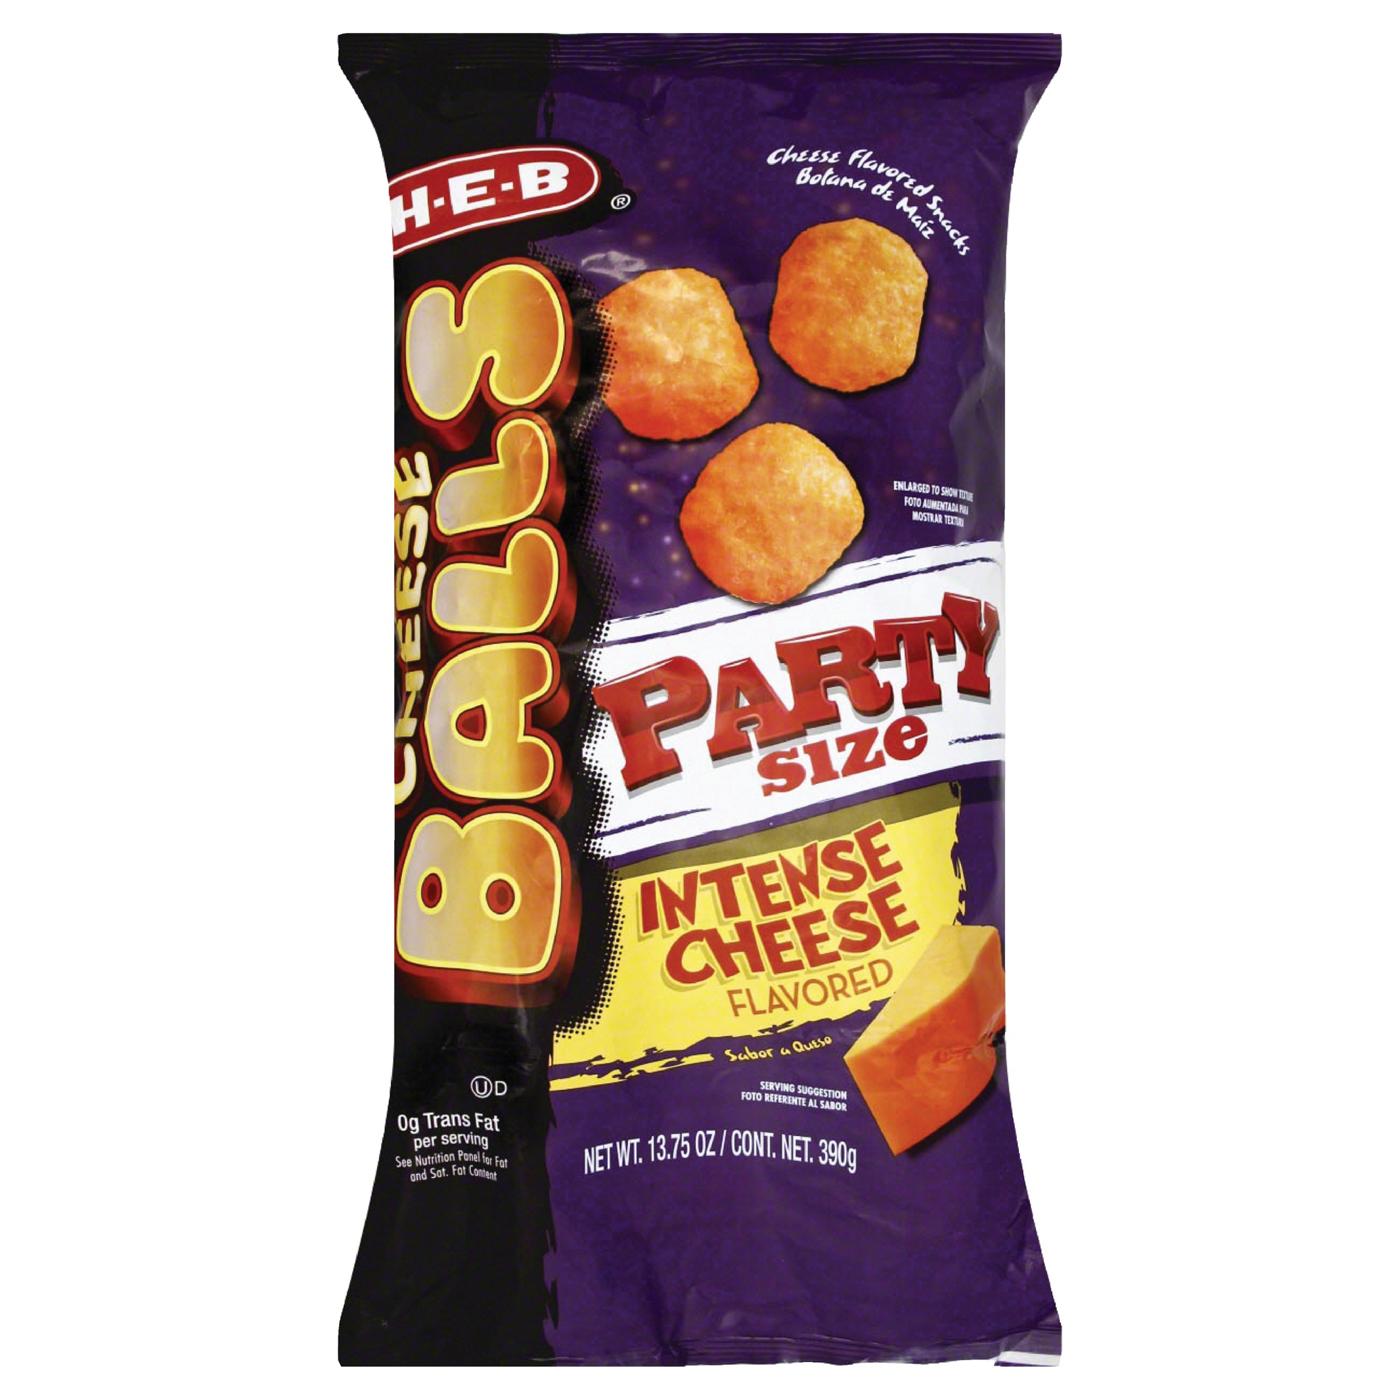 H-E-B Intense Cheese-Flavored Cheese Balls - Party Size; image 1 of 2